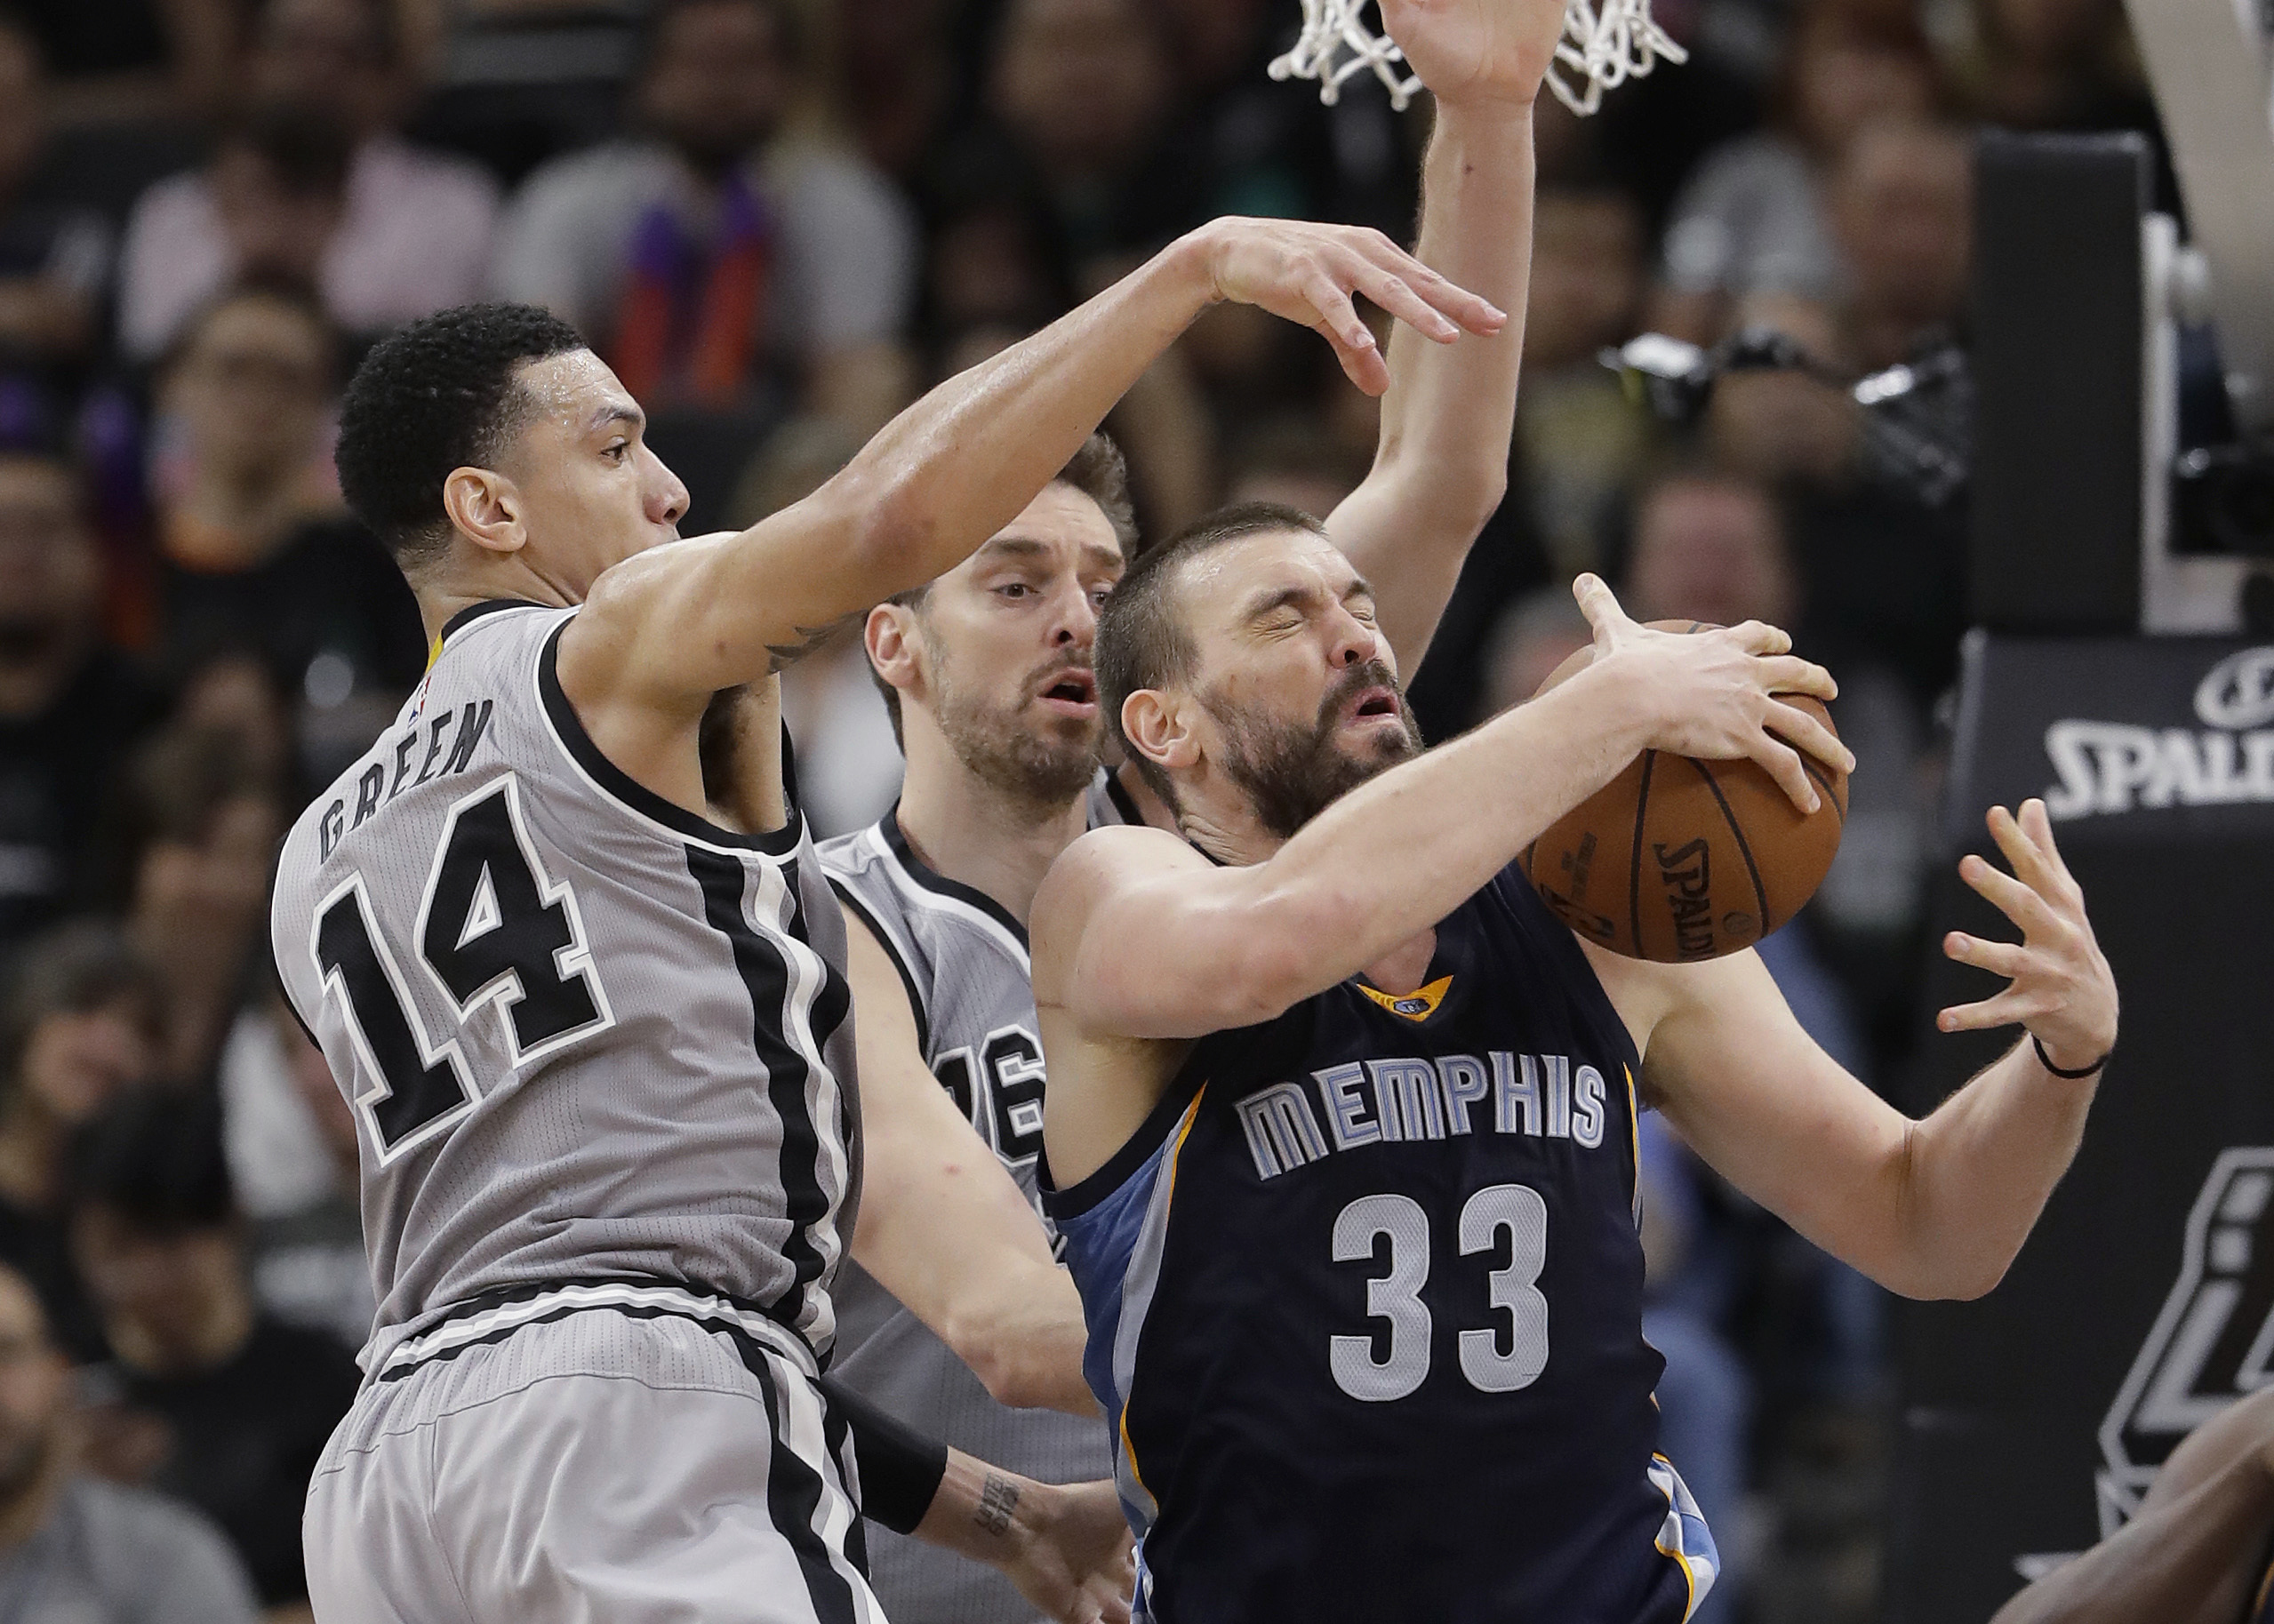 FILE - In this April 15, 2017, file photo, Memphis Grizzlies center Marc Gasol (33) is defended by San Antonio Spurs guard Danny Green (14) and center Pau Gasol during the second half in Game 1 of a first-round NBA basketball playoff series, in San Antonio. Pau and Marc Gasol have been battling each other on a basketball court since they were children with the older brother always finding ways to win. Now little brother Marc is doing his best to rally the Grizzlies to avoid being swept away in their first playoff meeting.  (AP Photo/Eric Gay, File)